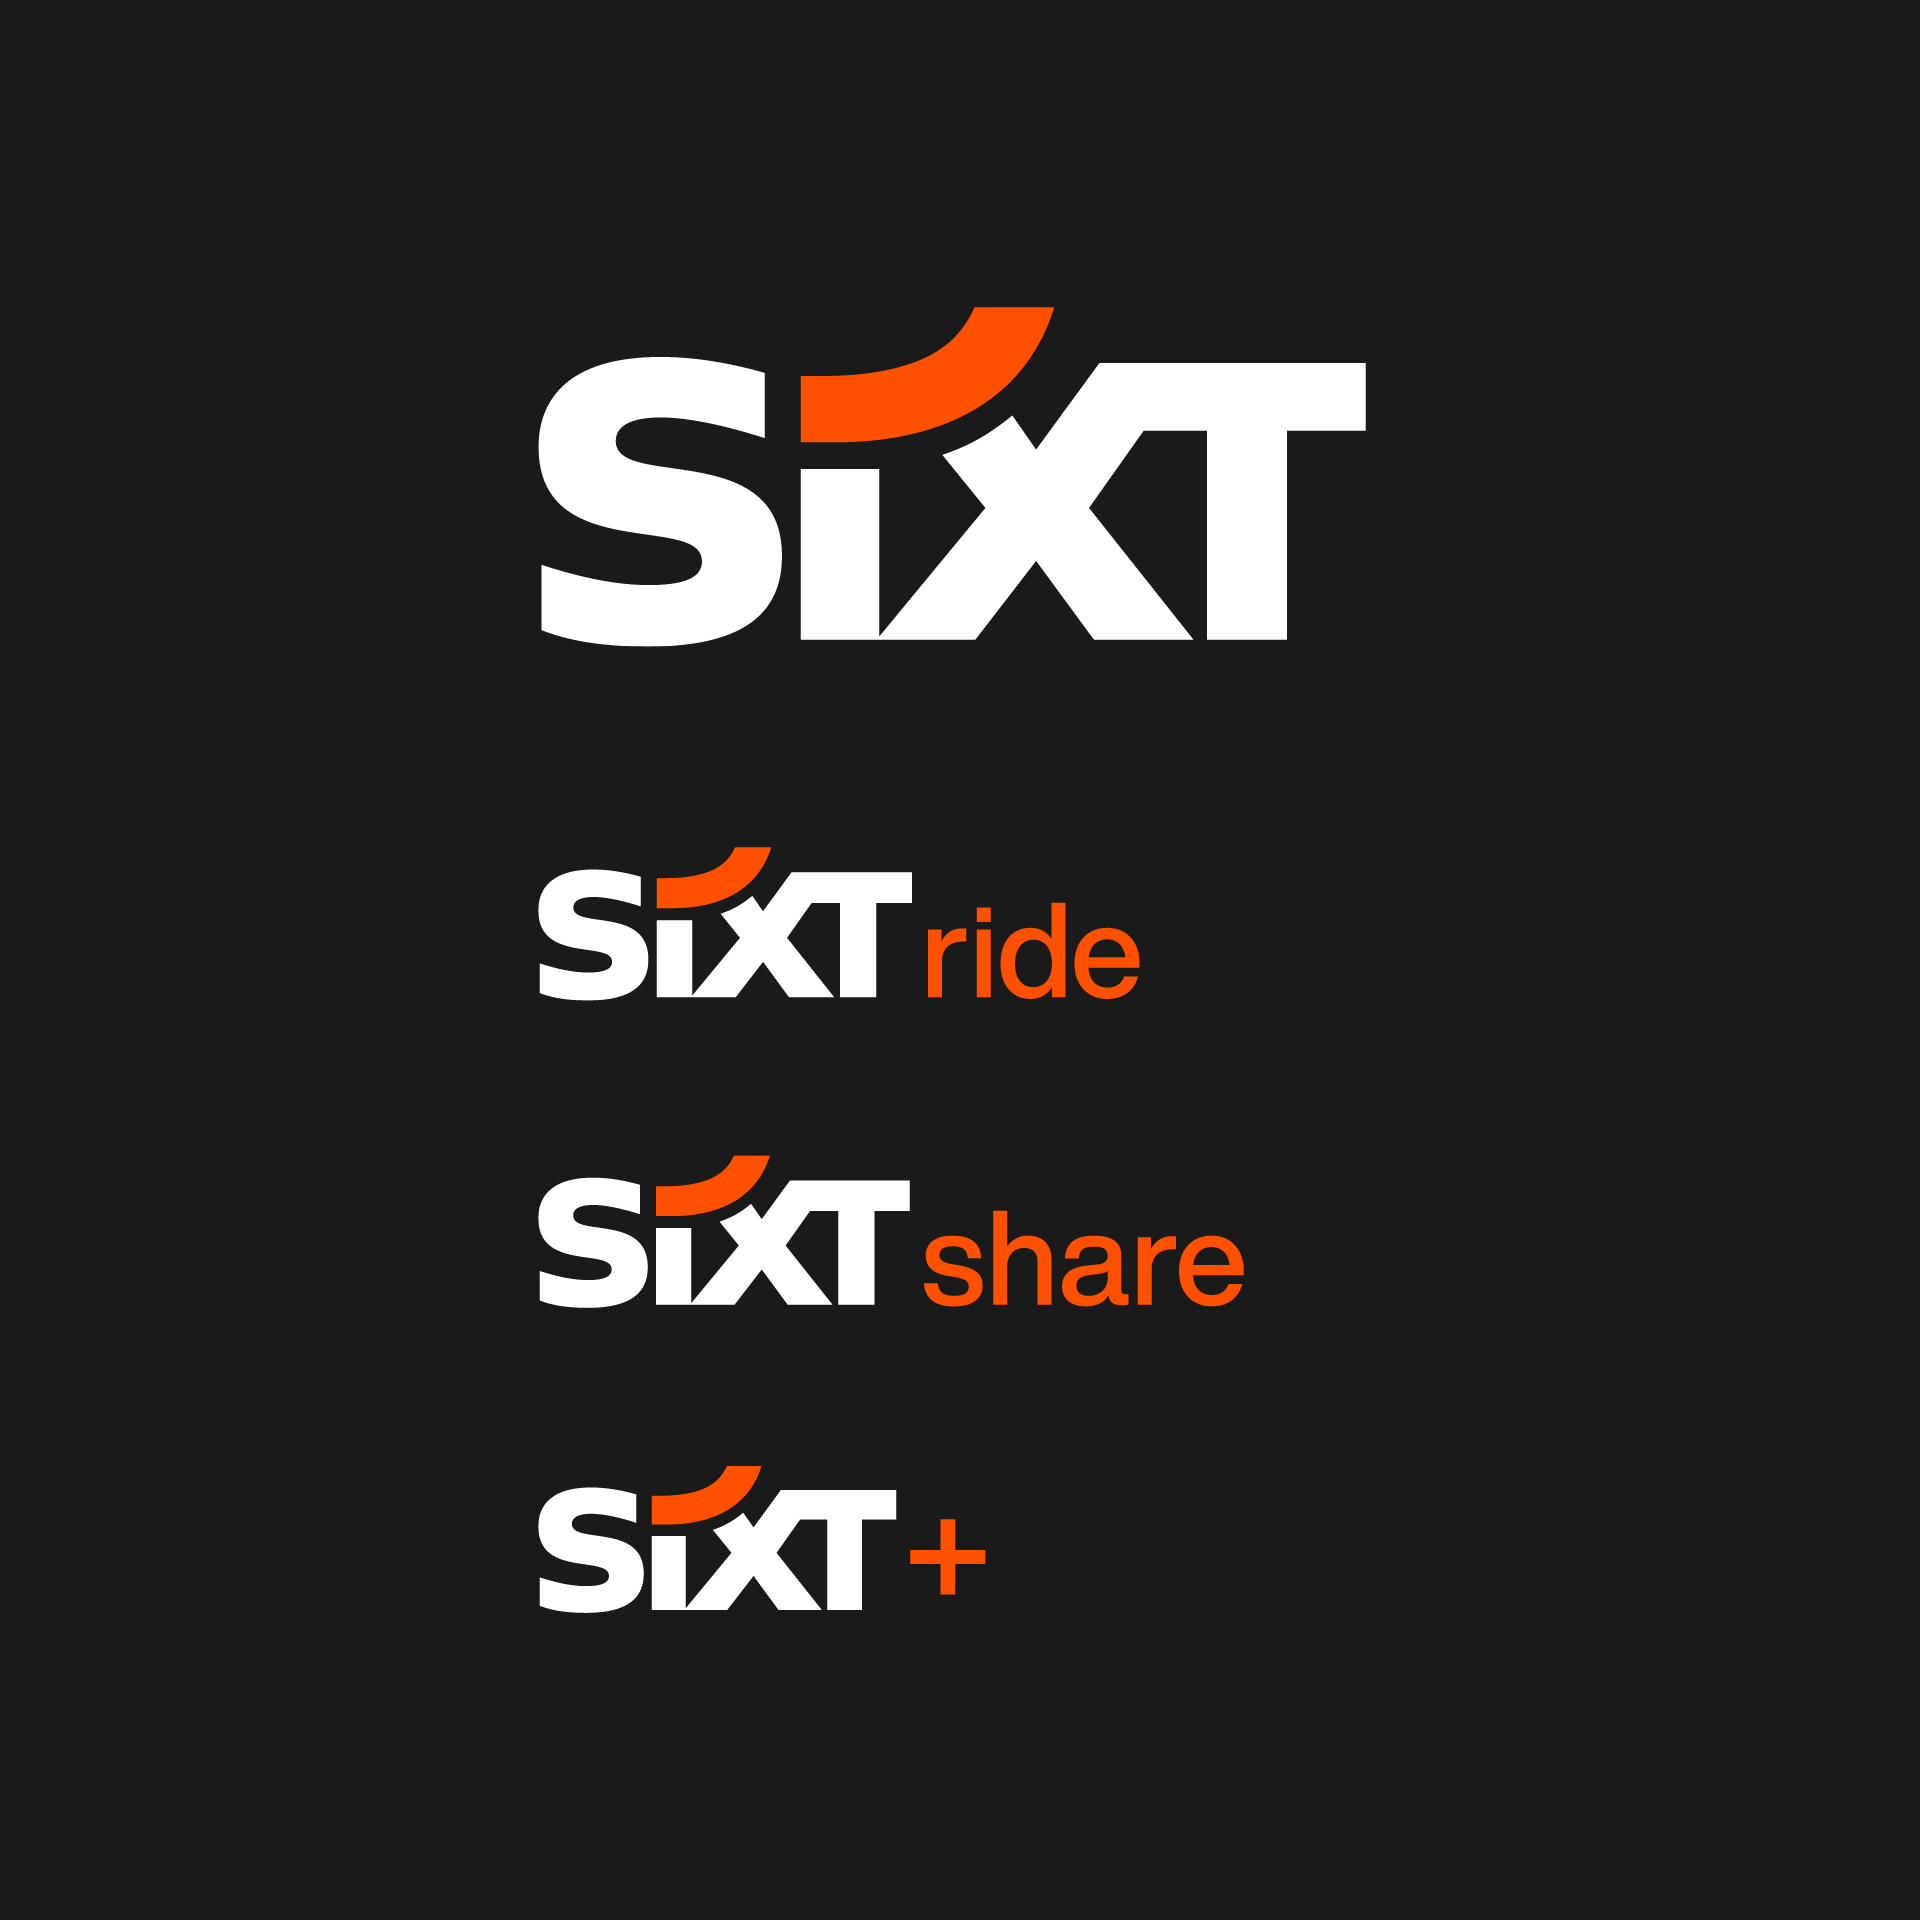 Four brand logos of iconic car rental company SIXT on black background: SIXT, SIXT ride, SIXT share, SIXT+